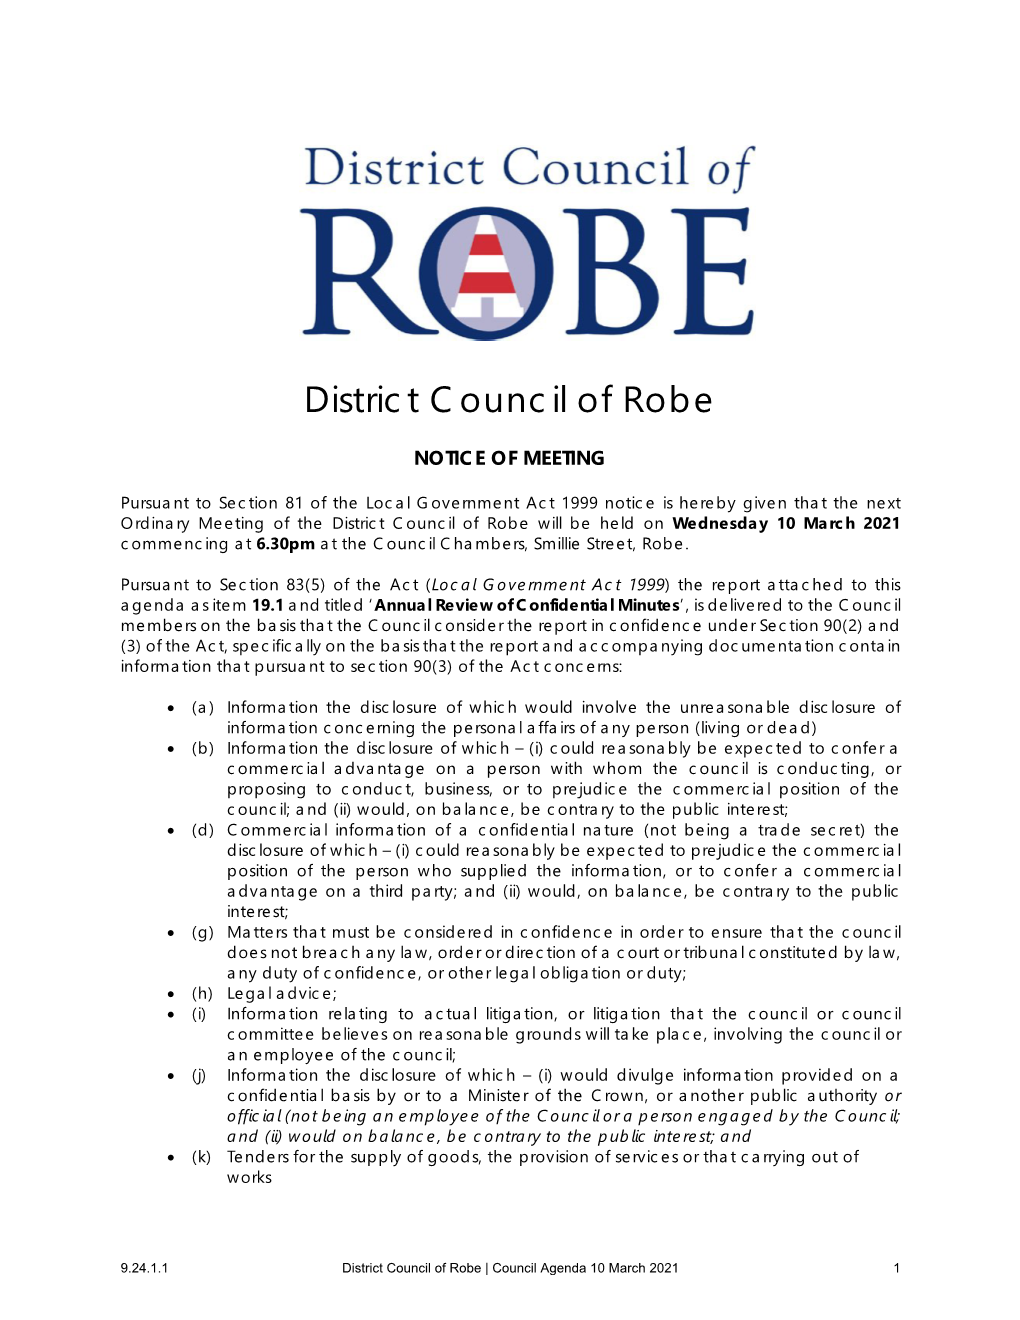 District Council of Robe